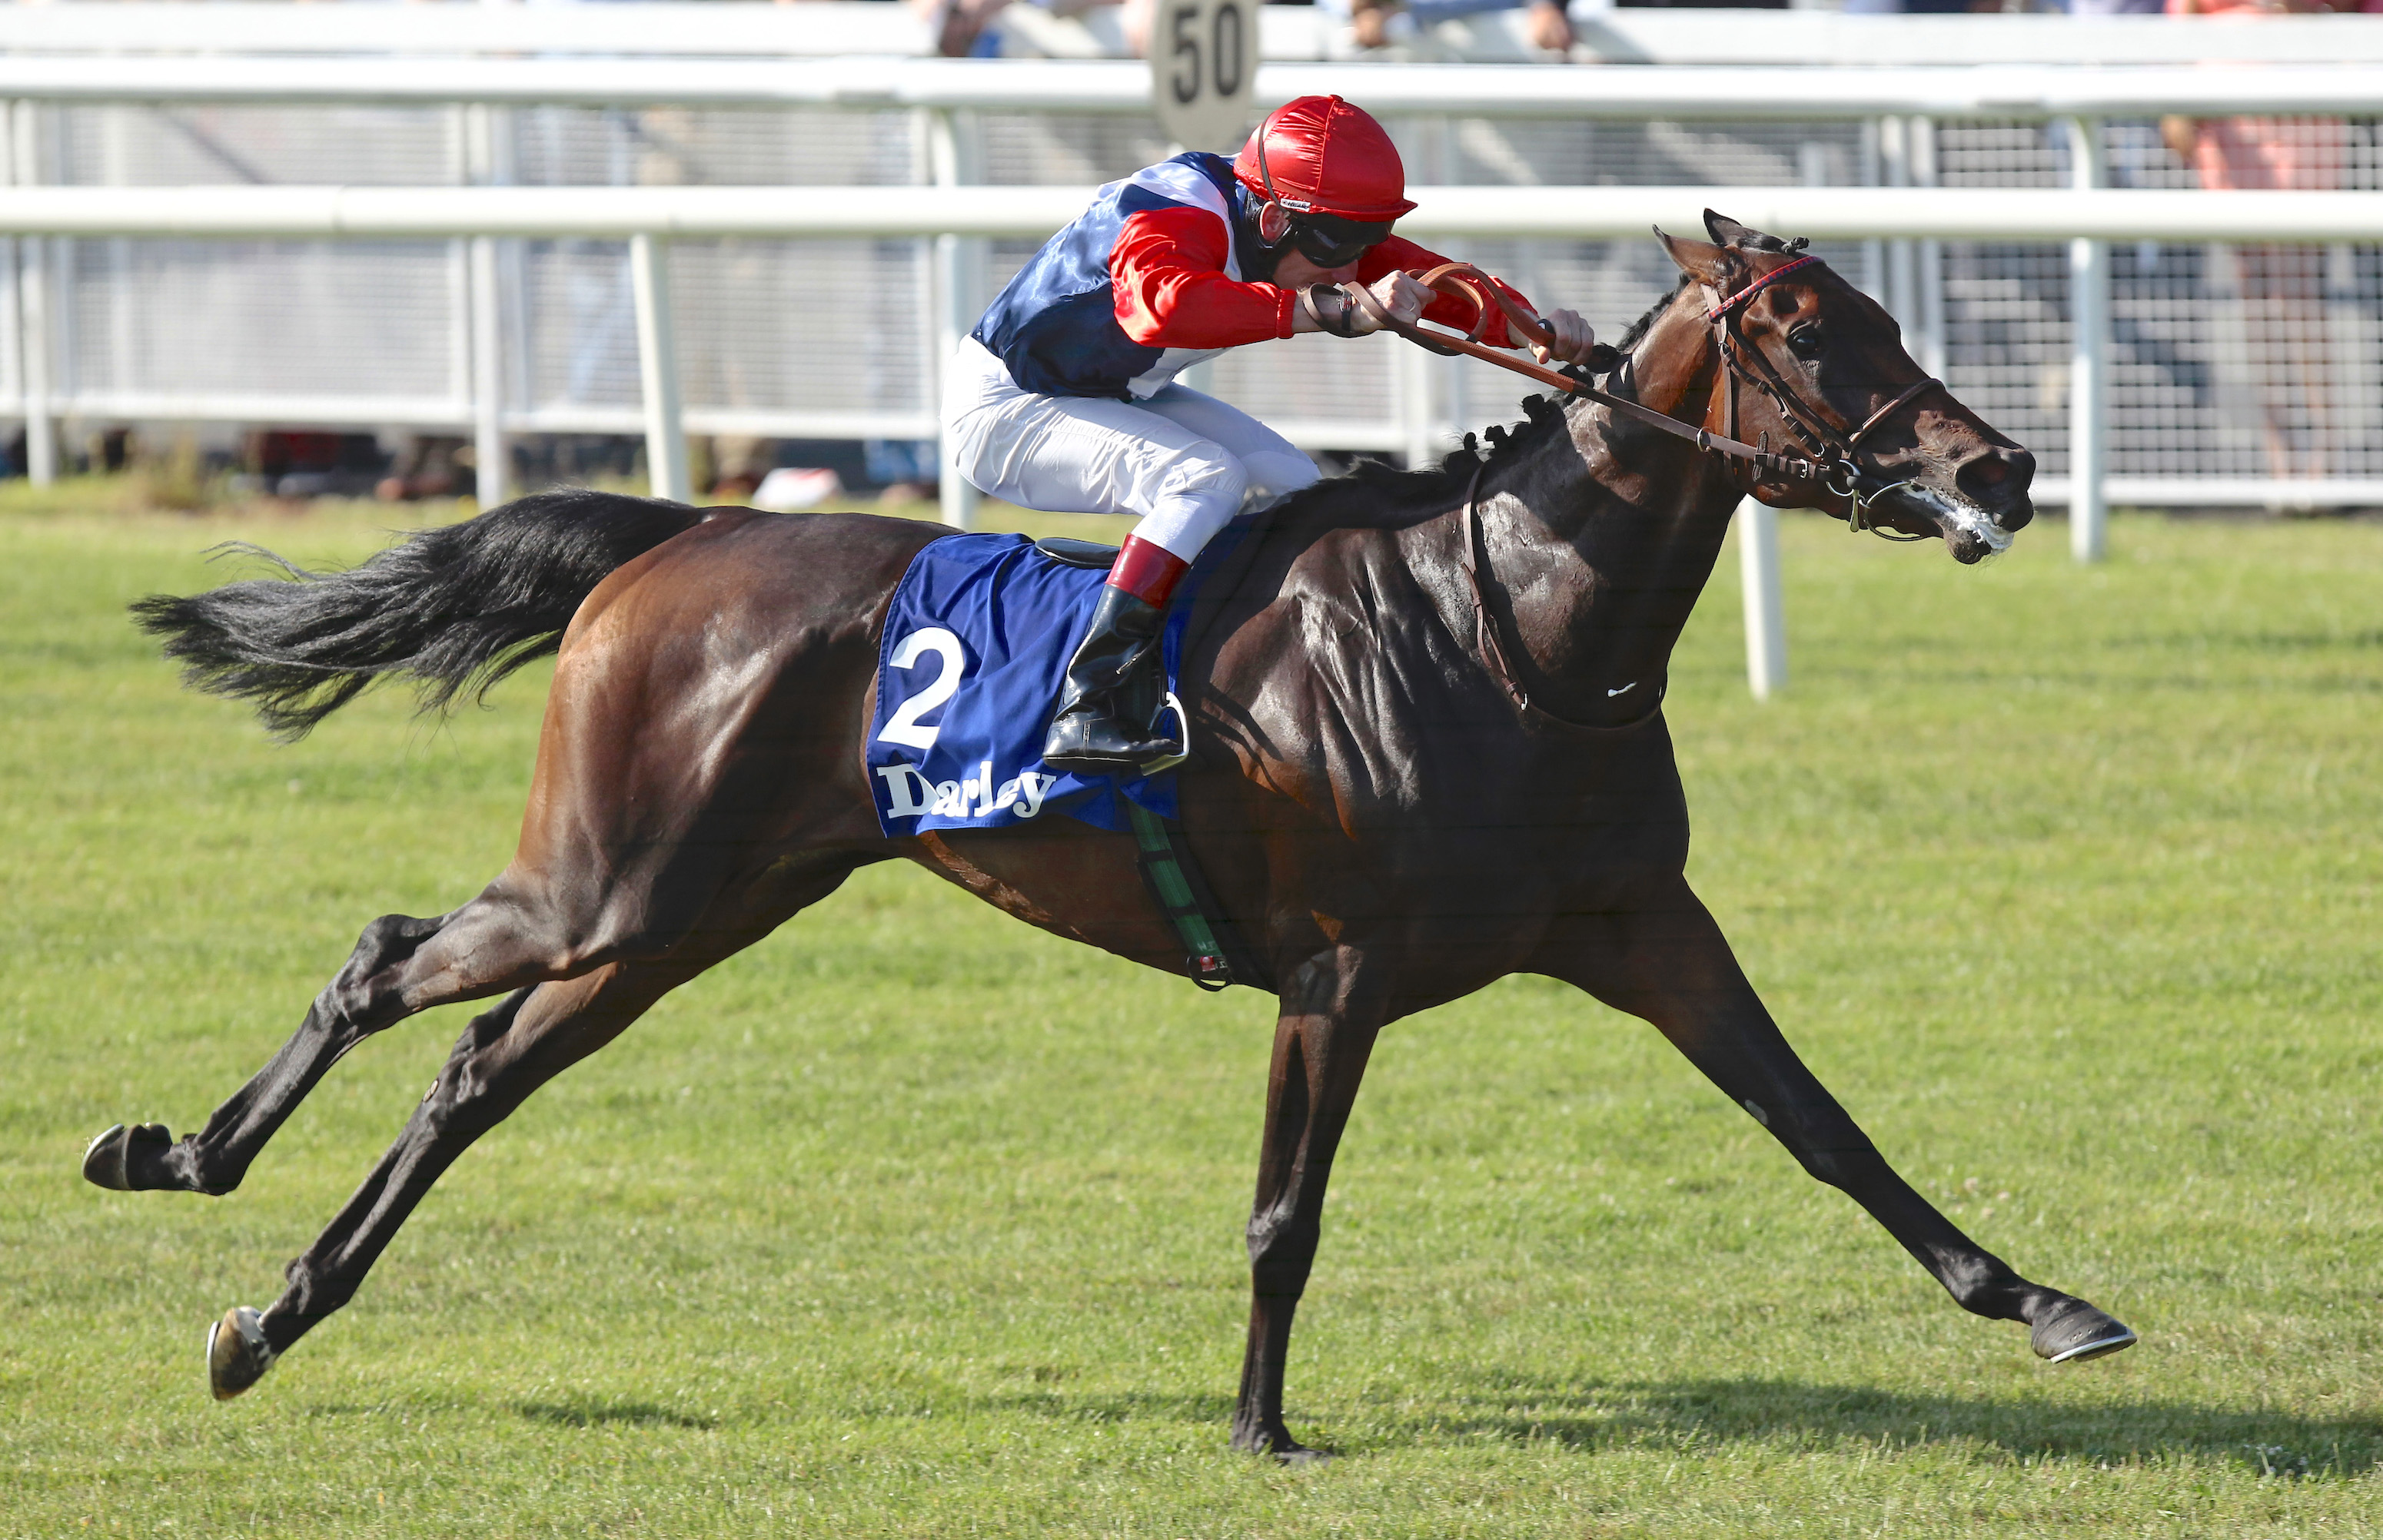 Chicquita on her way to victory in the 2013 Irish Oaks at the Curragh